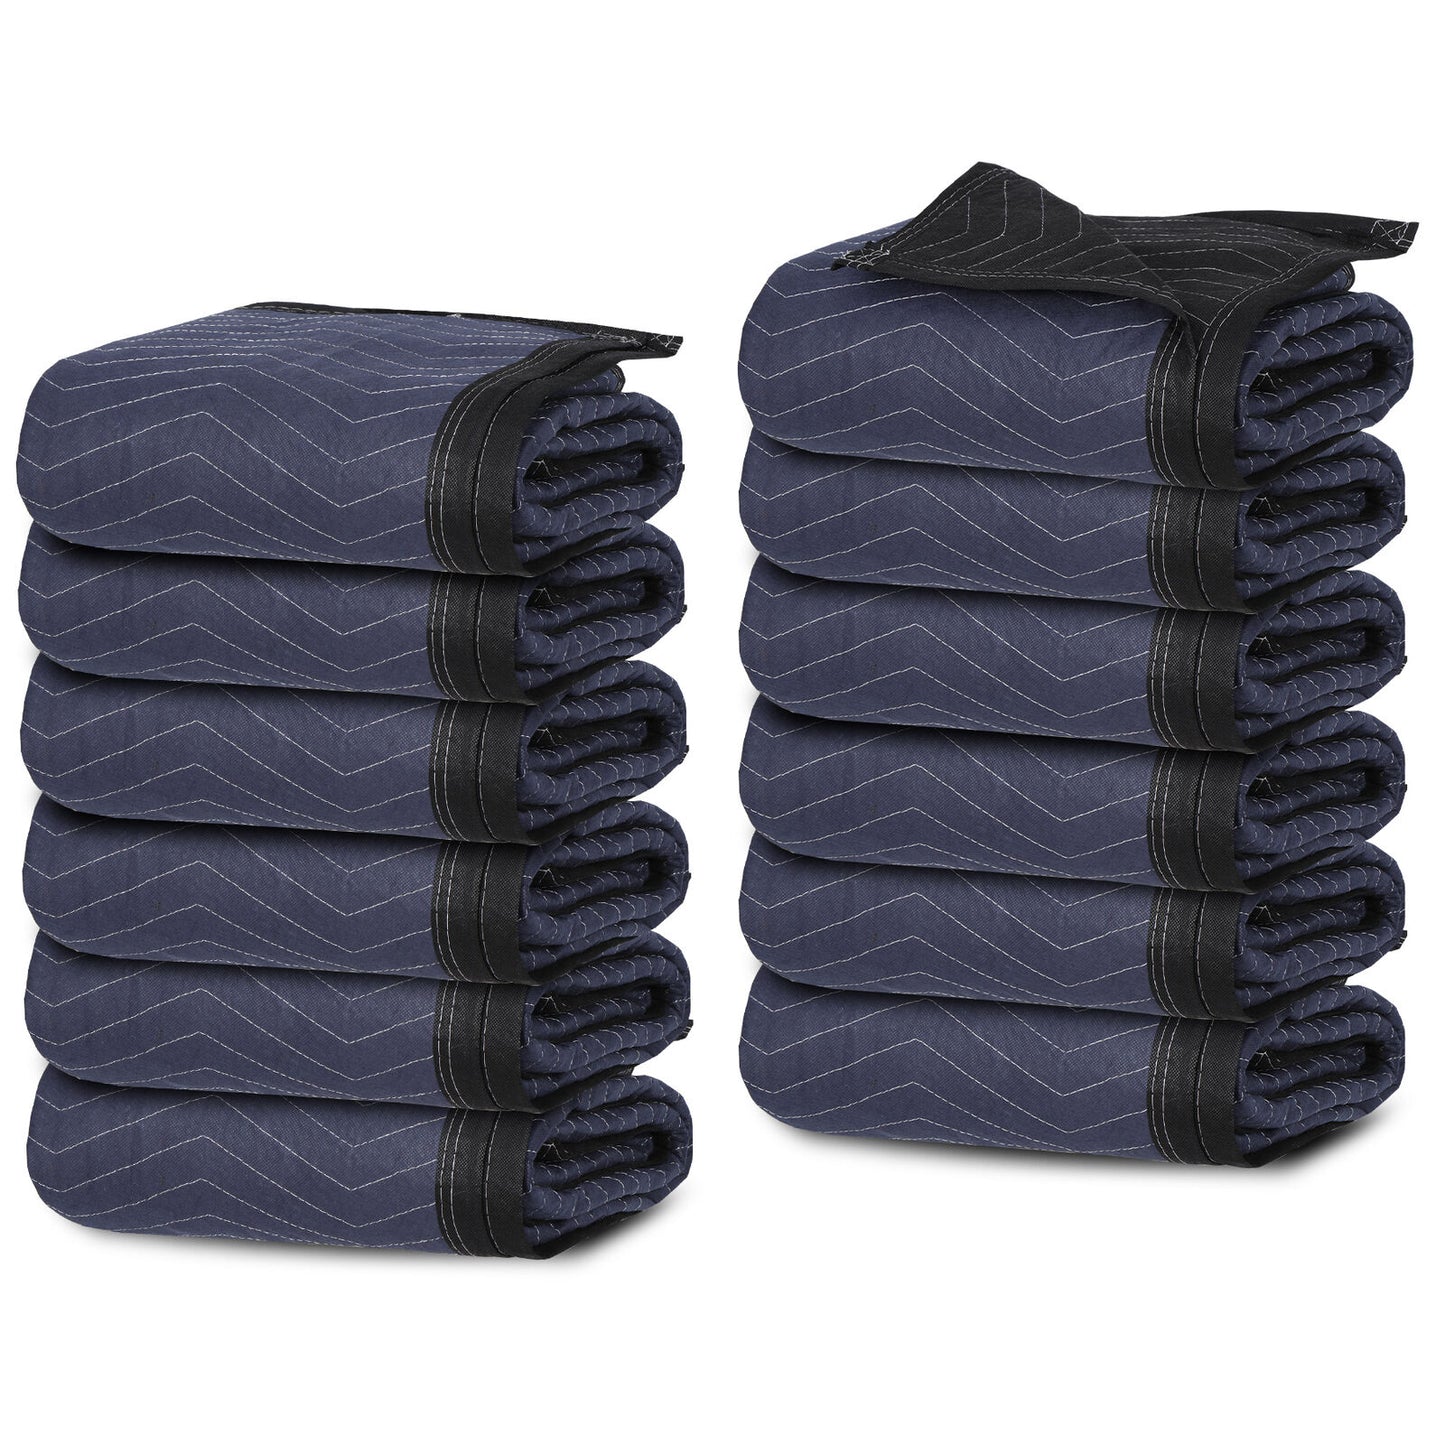 80"x72" Furniture 24 Moving Blankets Protective Shipping Packing Pads Blue/Black